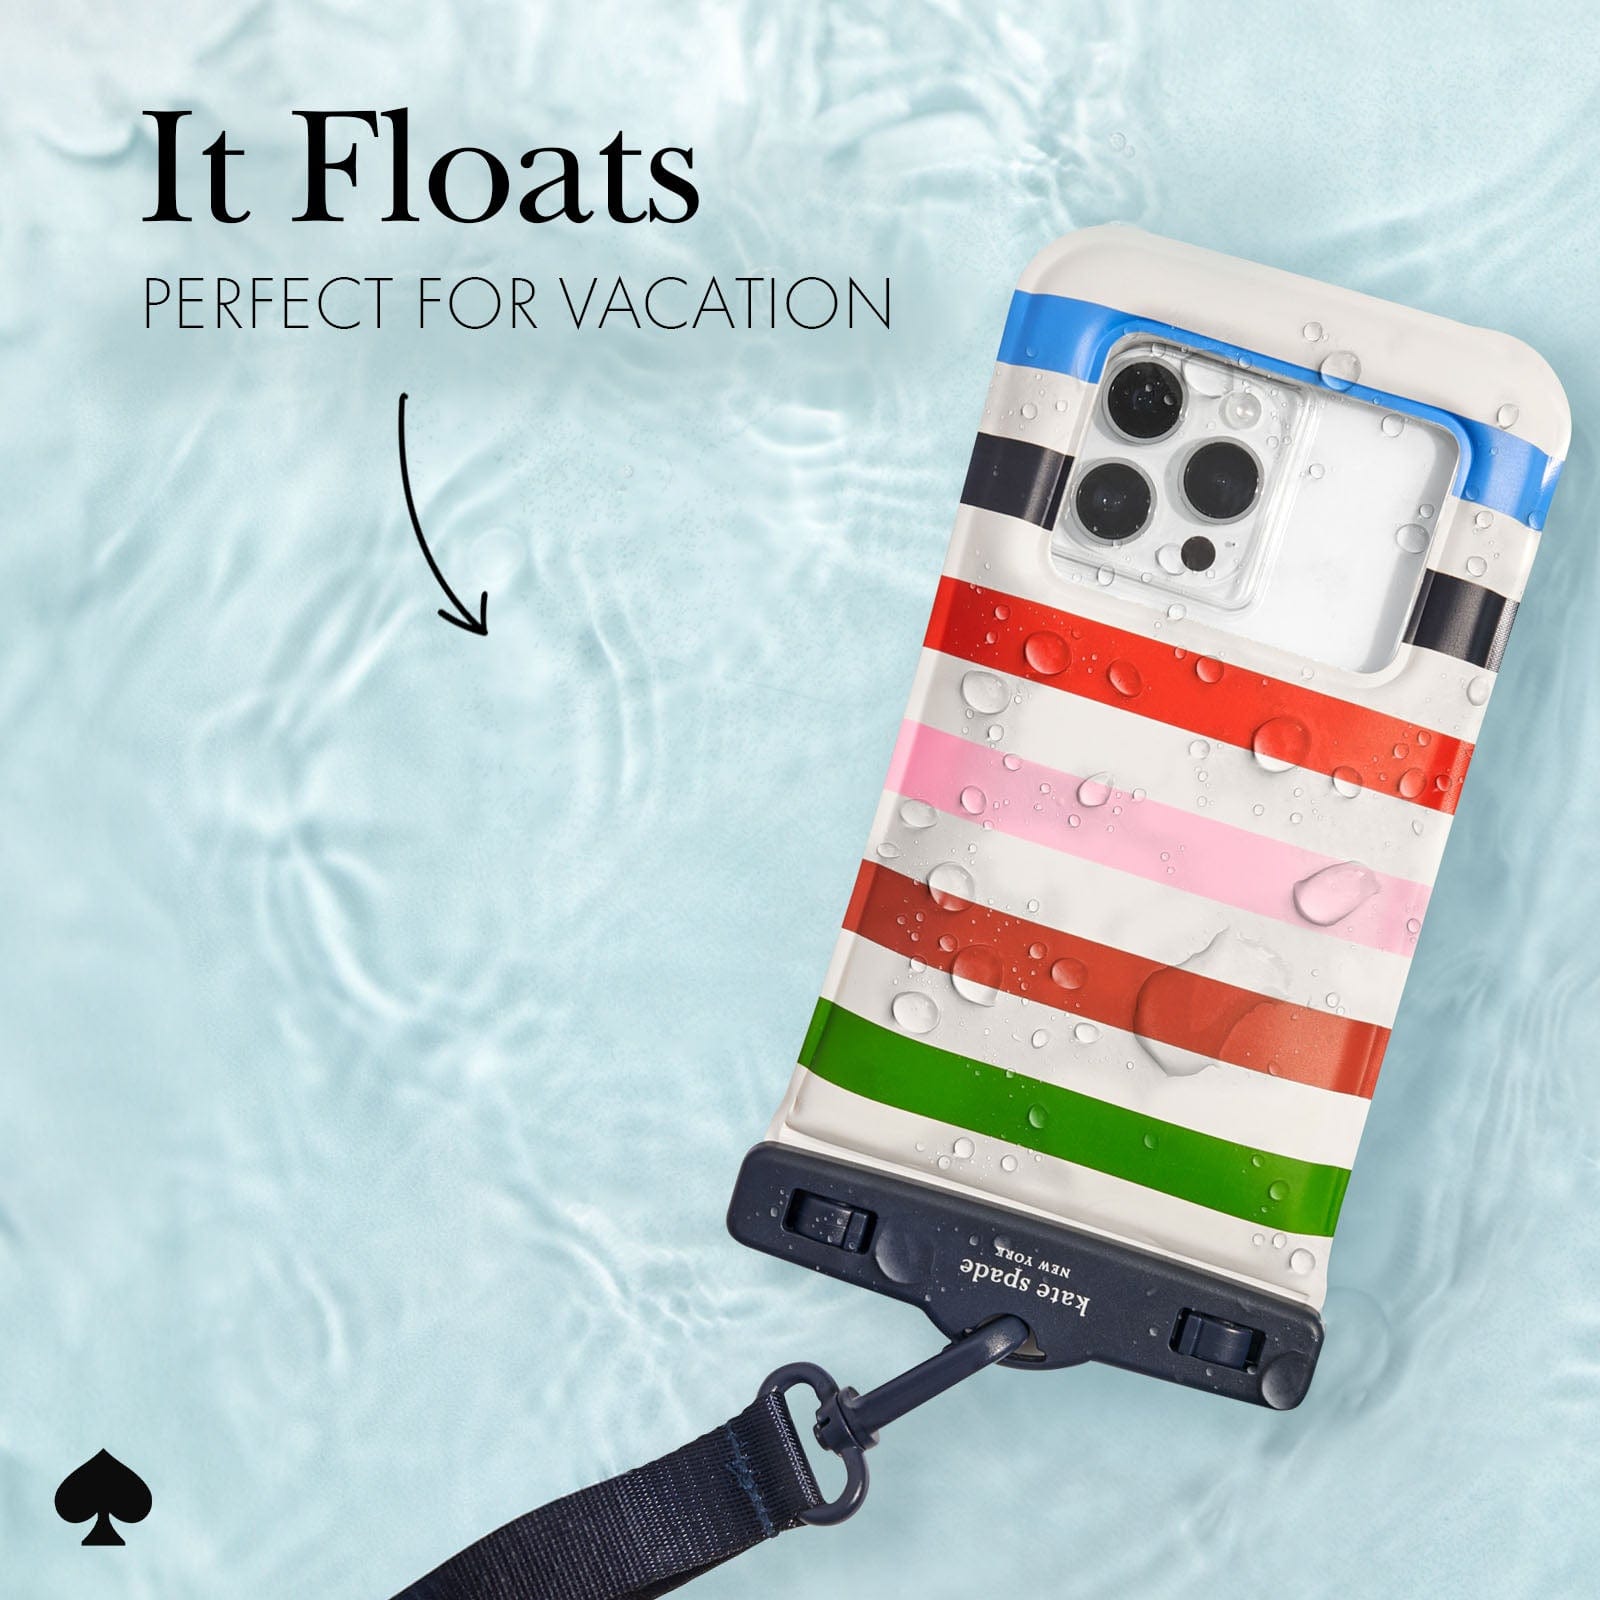 IT FLOATS PERFECT FOR VACATION